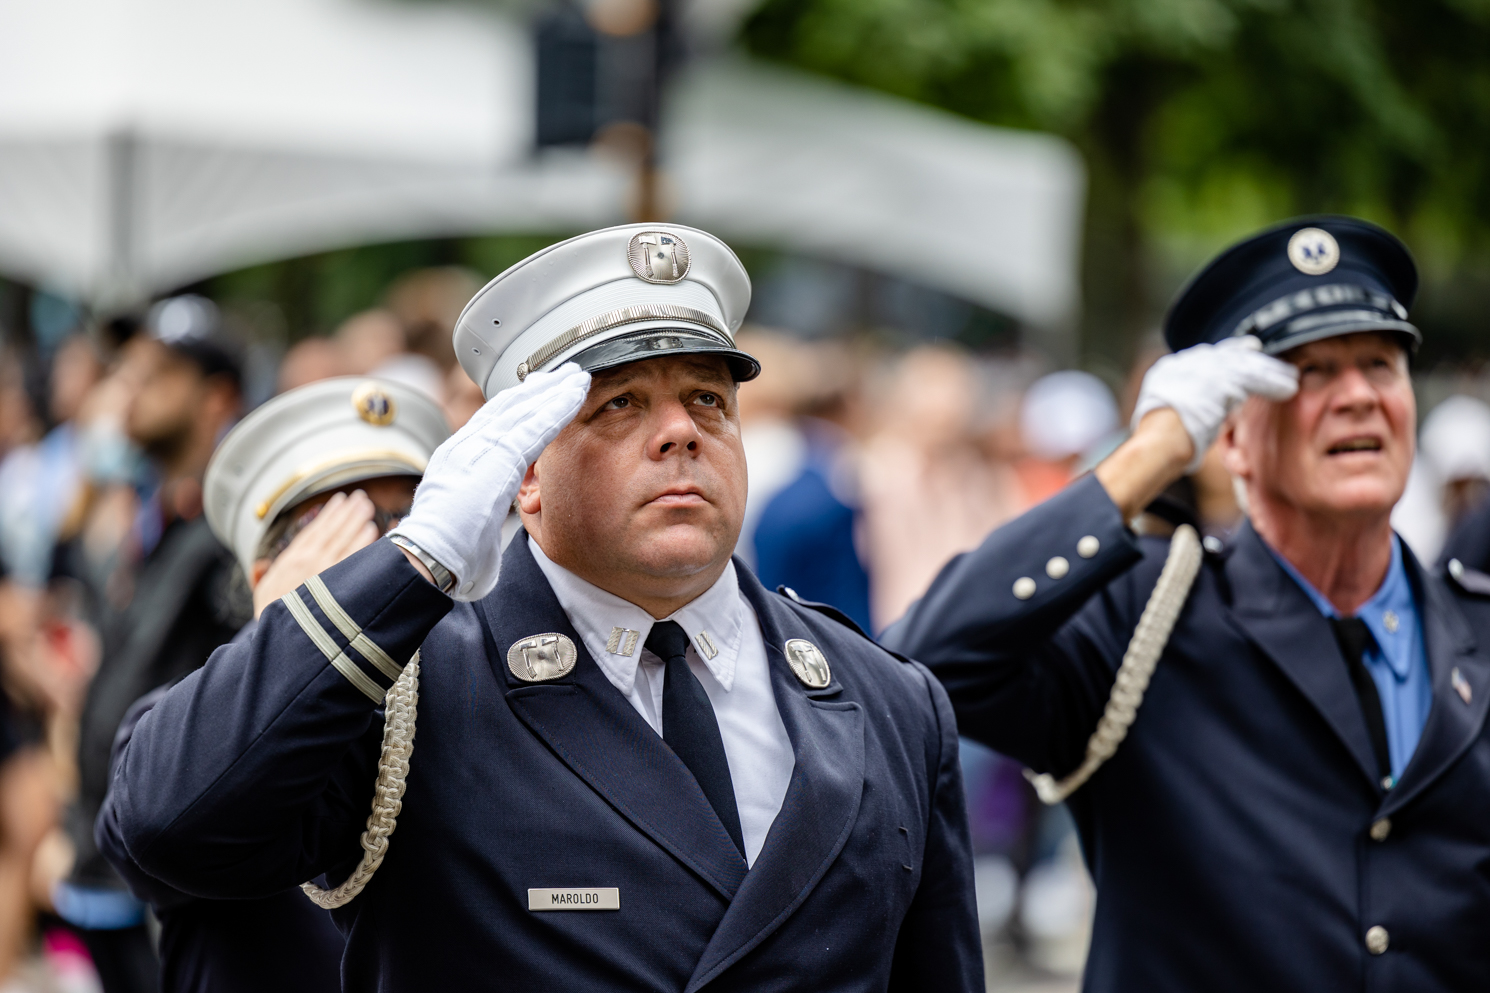 Officer Maroldo salutes to the memorial dressed in a navy uniform, white hat and white gloves.